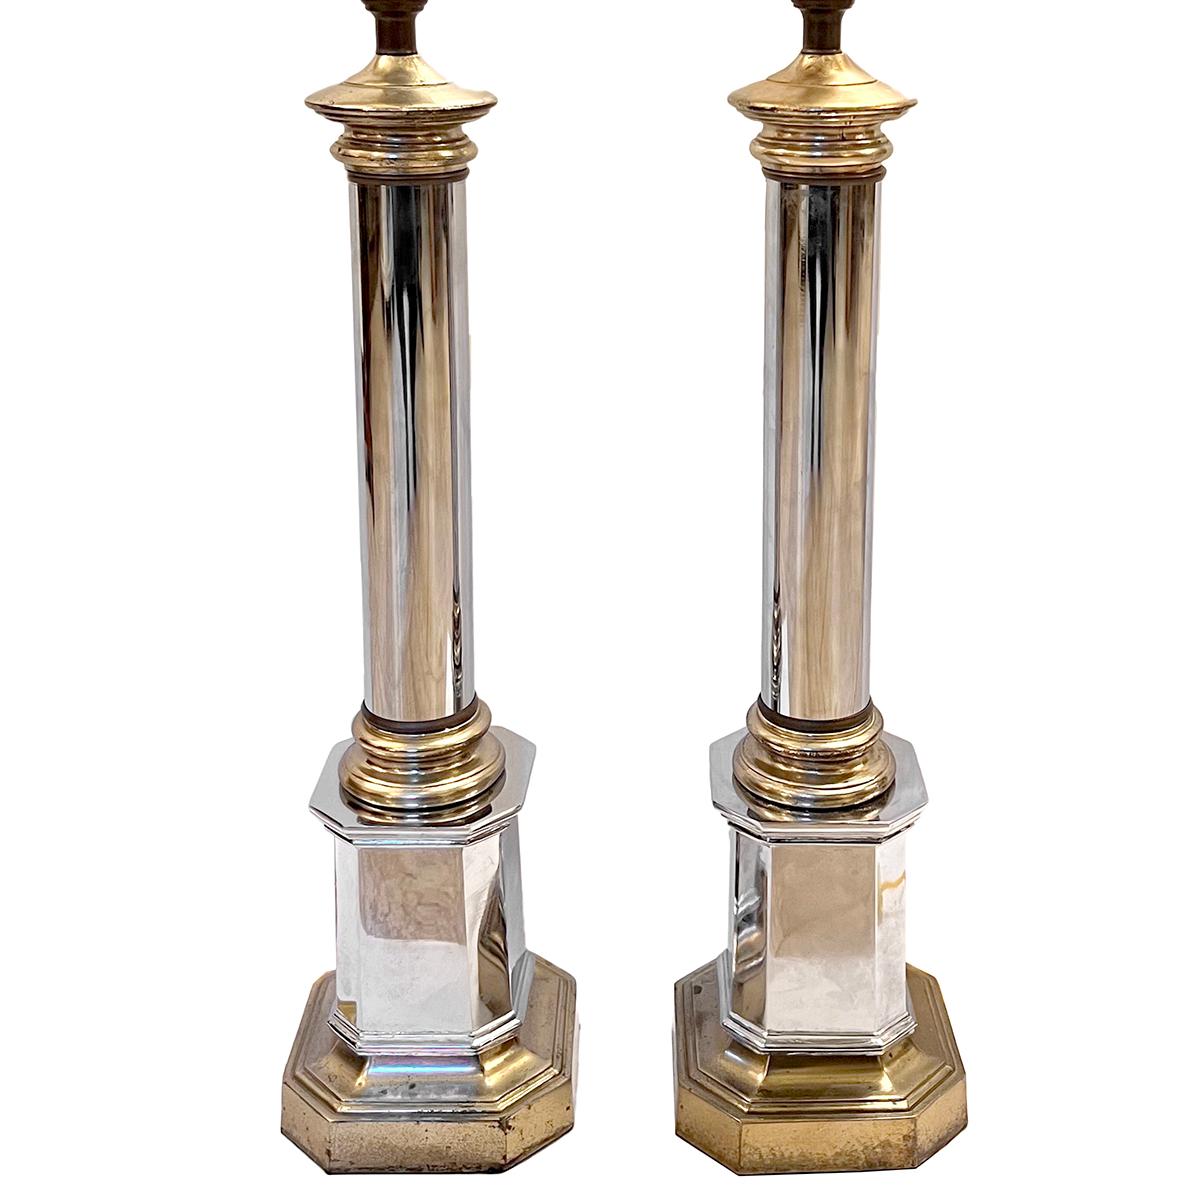 Pair of circa 1960's French nickel plated and polished bronze lamps.

Measurements:
Height of body: 18.75